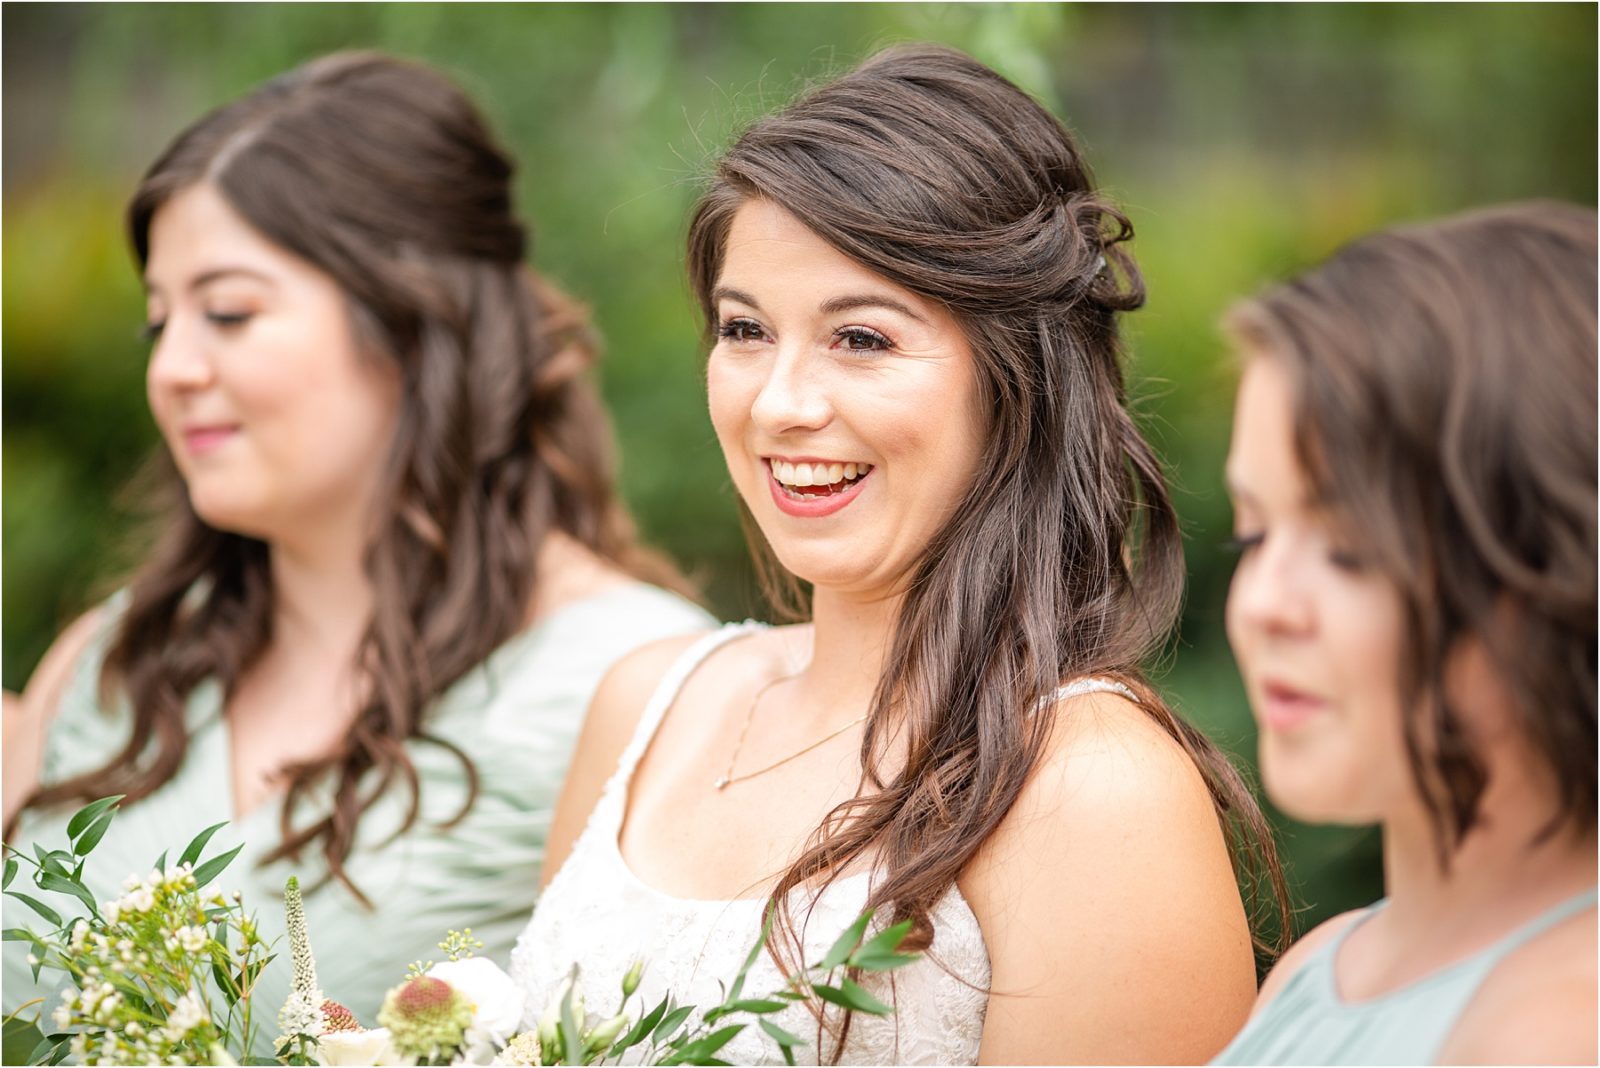 Bride in wedding gown smiles at friends